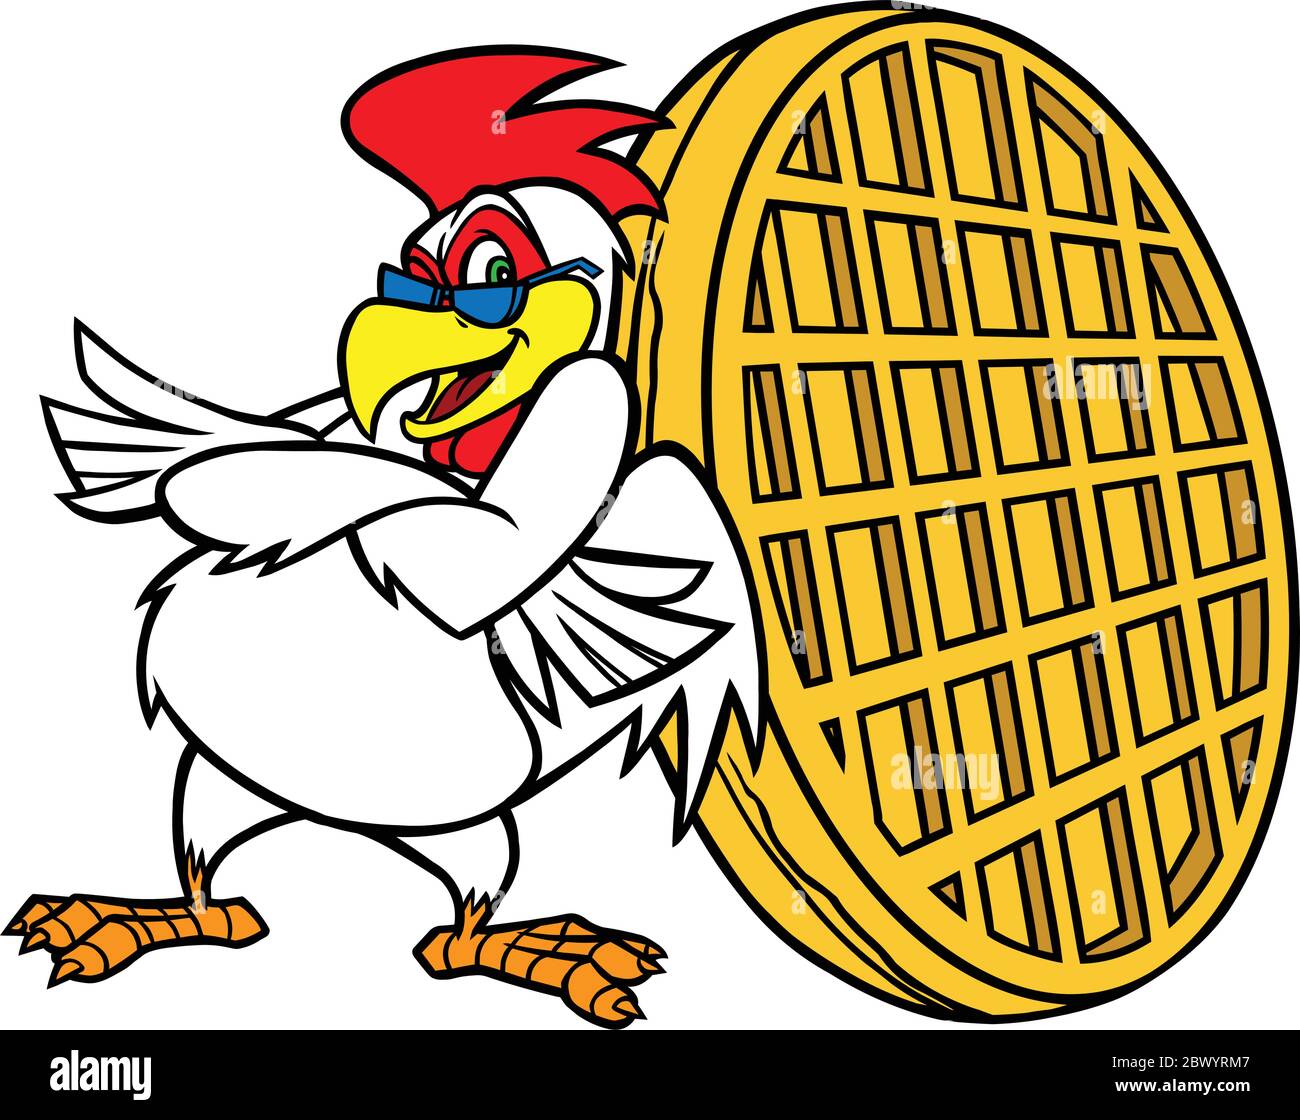 Chicken And Waffle Mascot A Cartoon Illustration Of A Chicken And Waffle Stock Vector Image Art Alamy